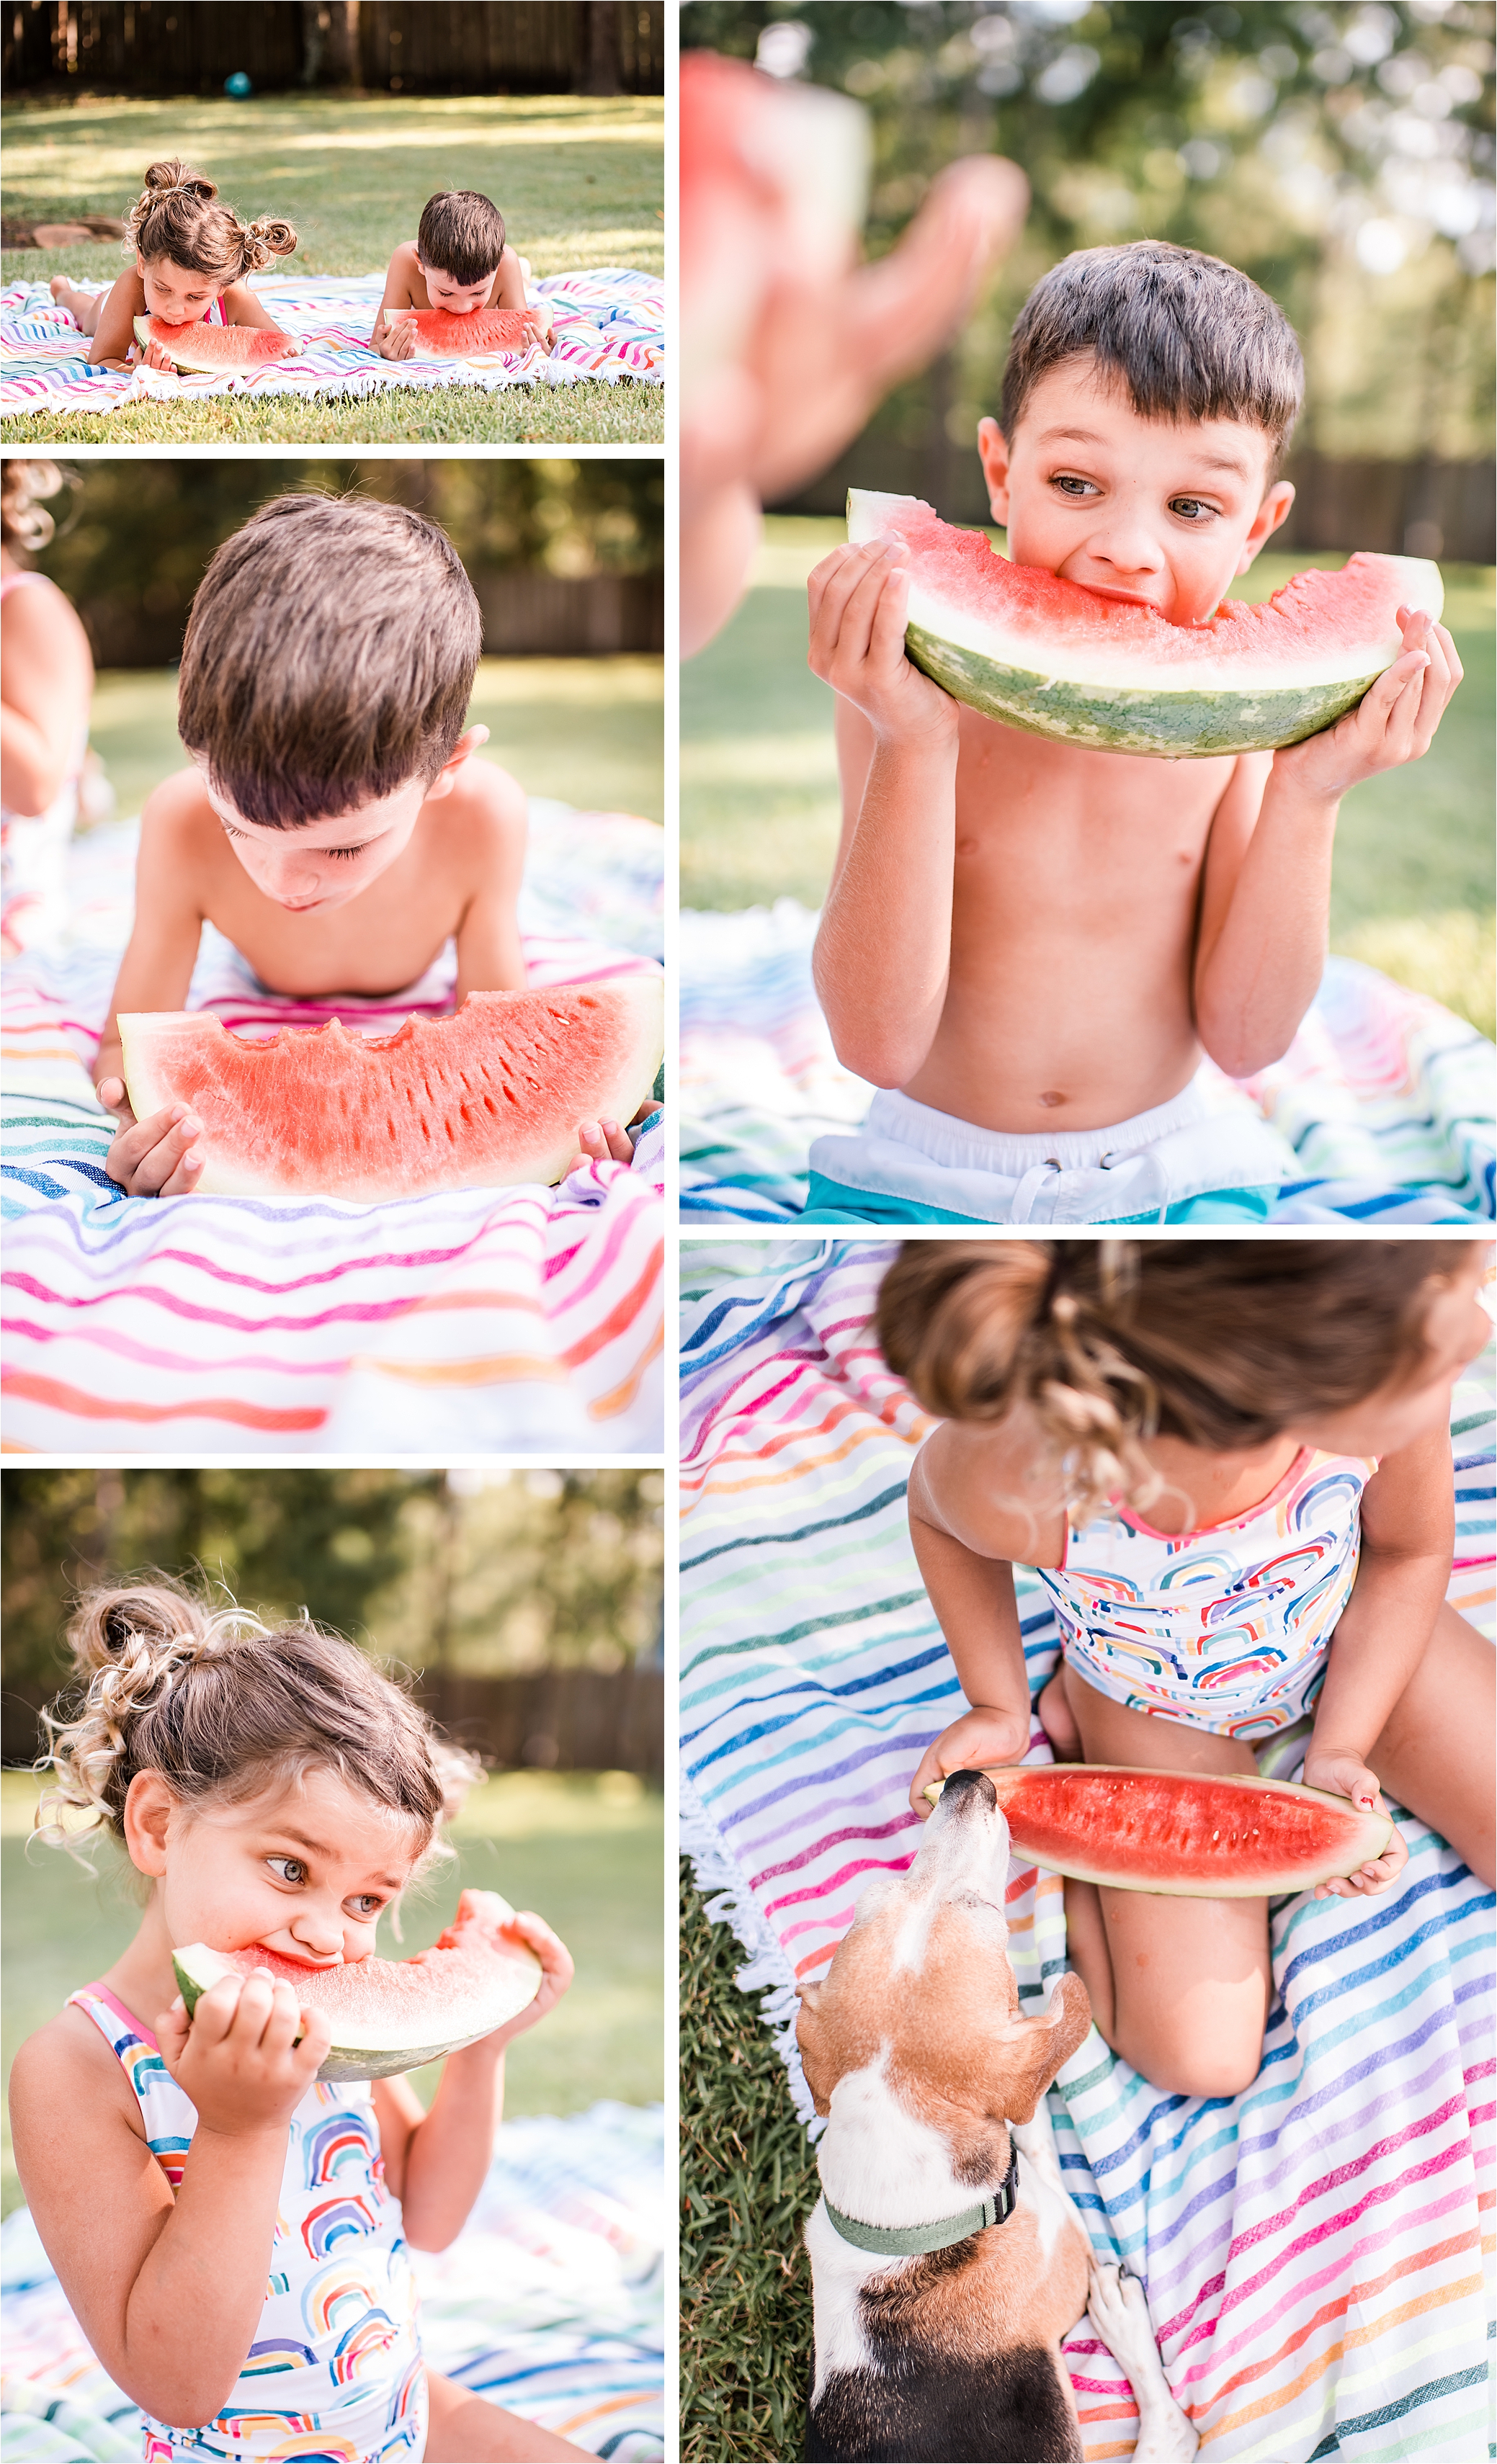 boy and girl eating watermelon, backyard eating contest. The Woodlands, Texas.